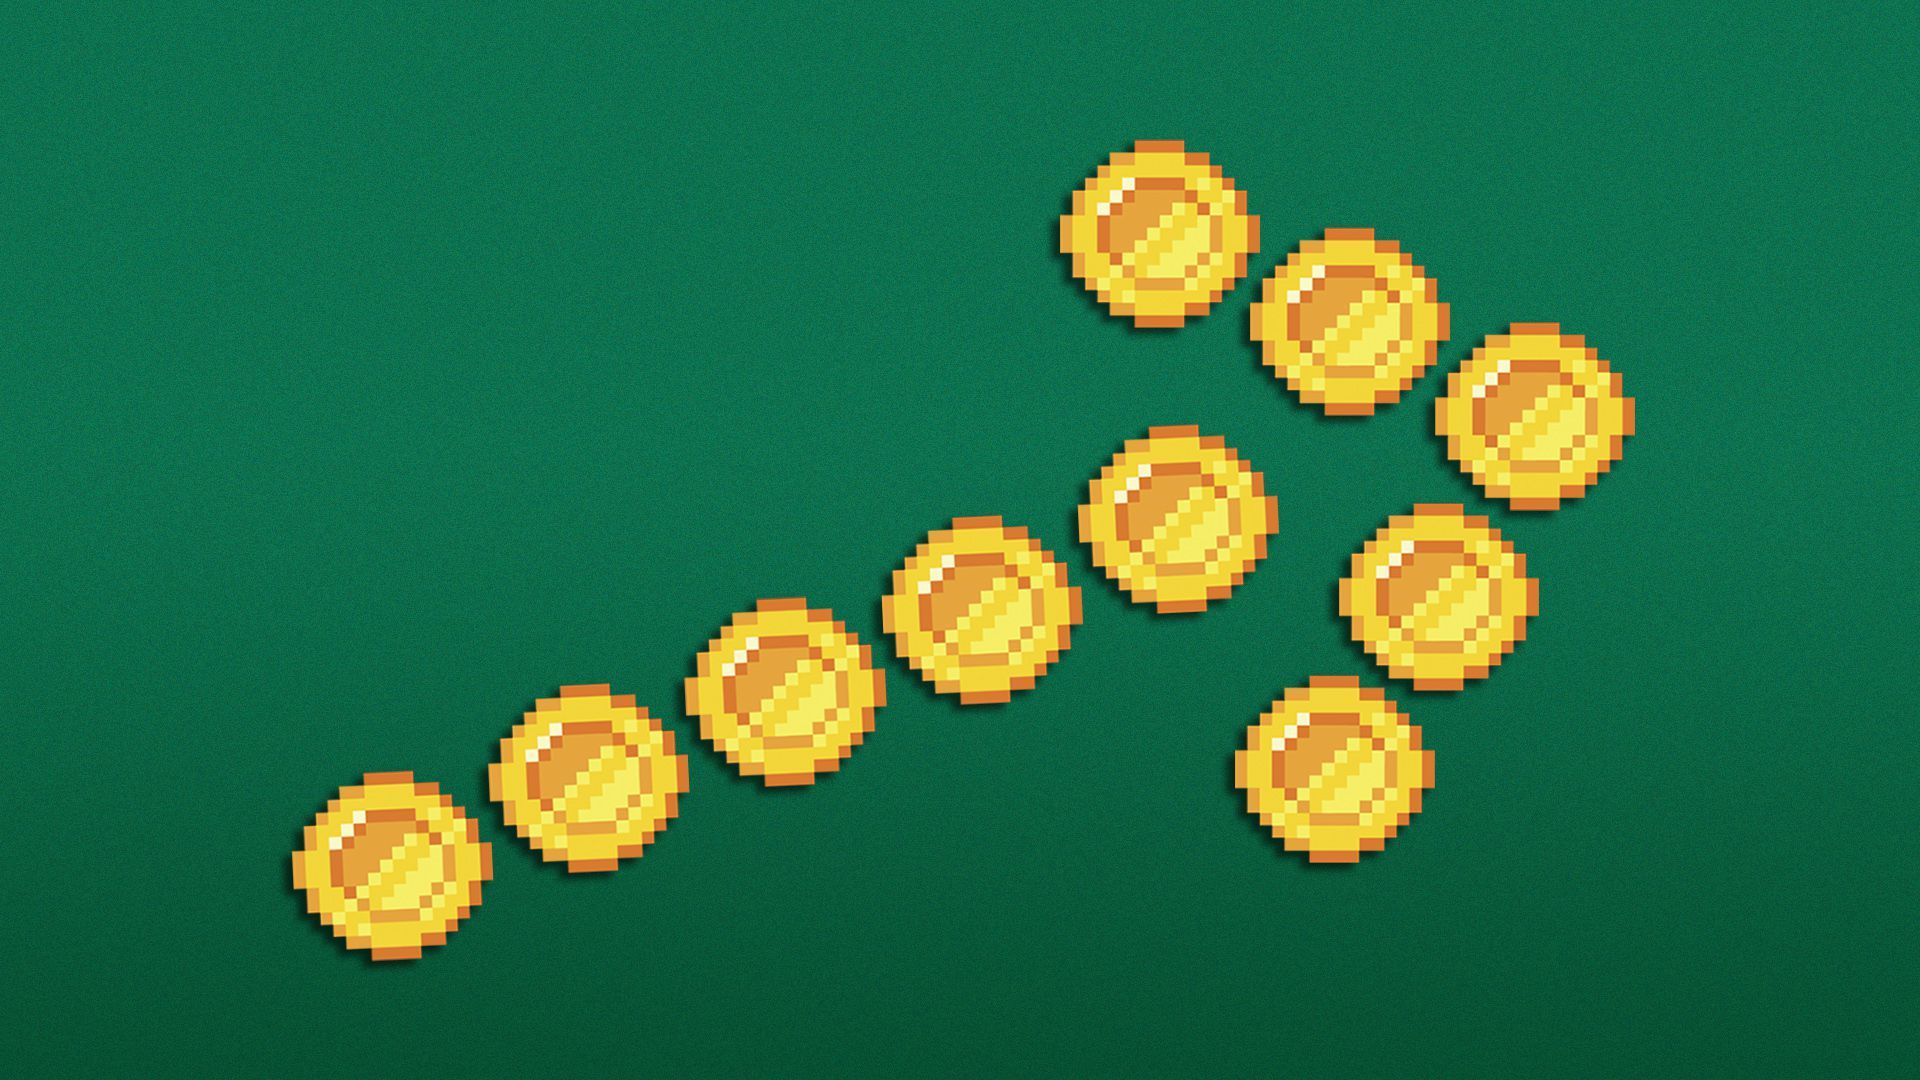 Illustration of pixelated coins in the shape of an arrow pointing up.